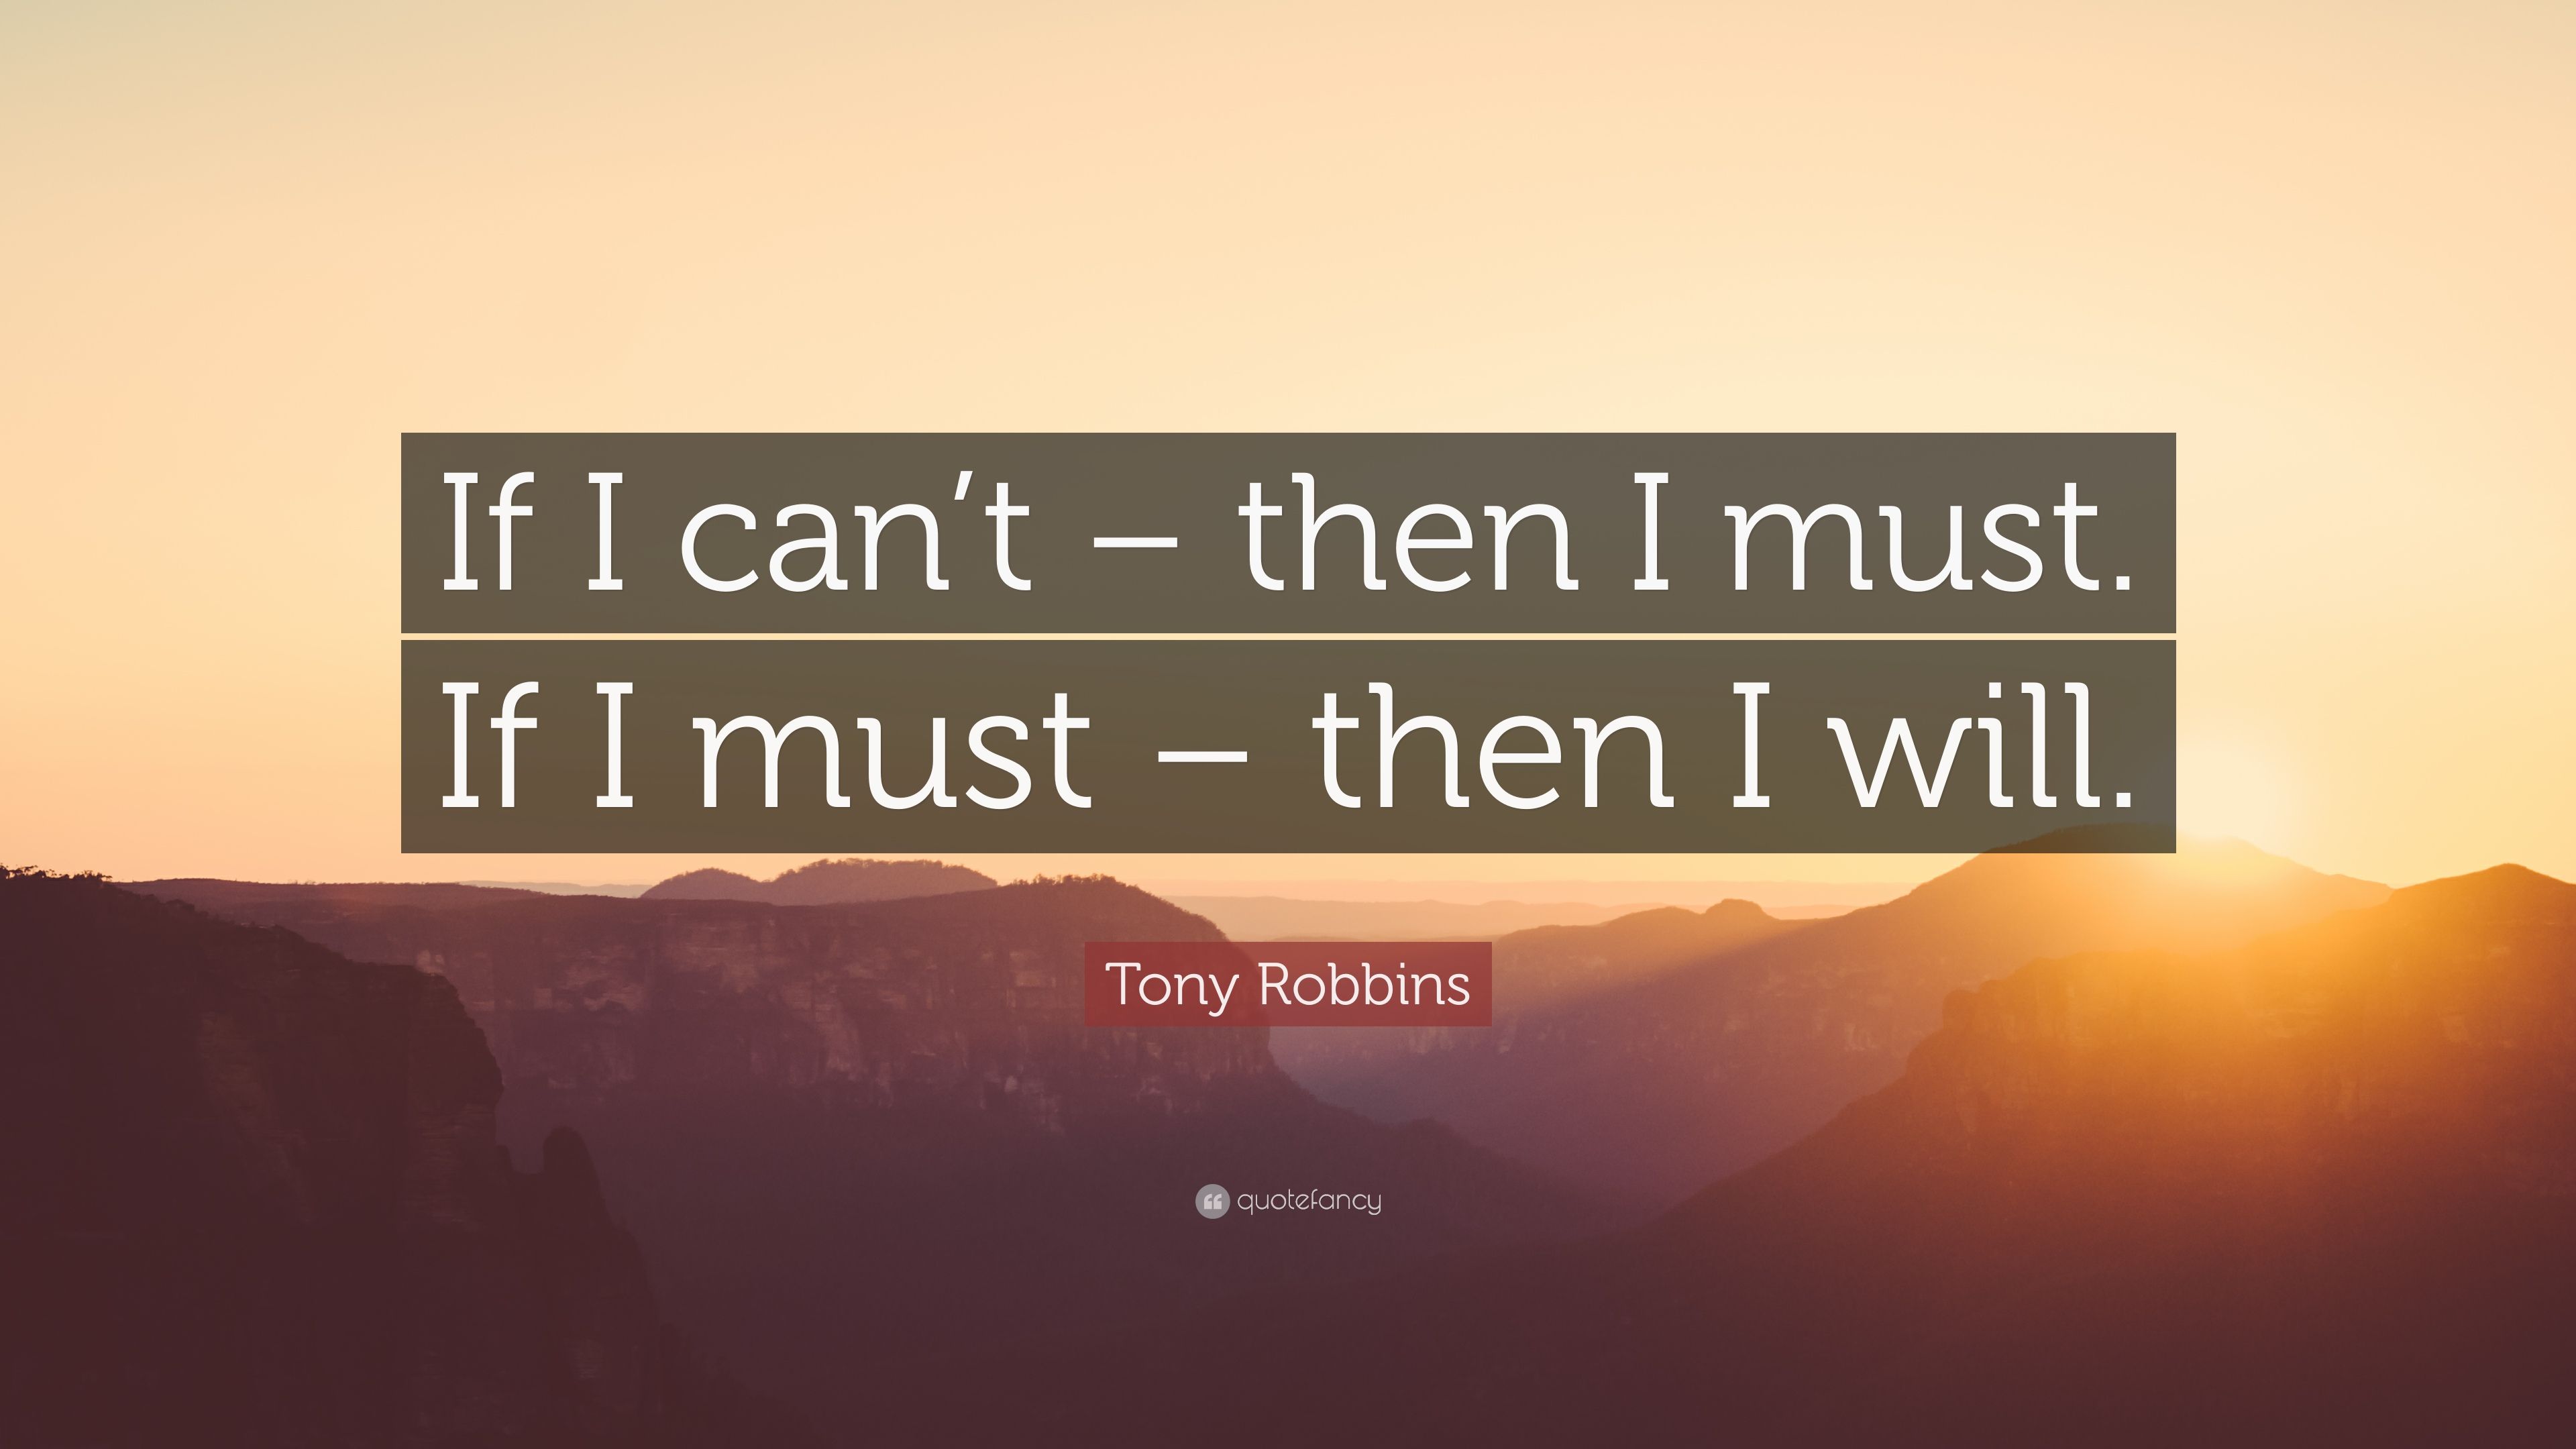 Tony Robbins Quote: “If I can't